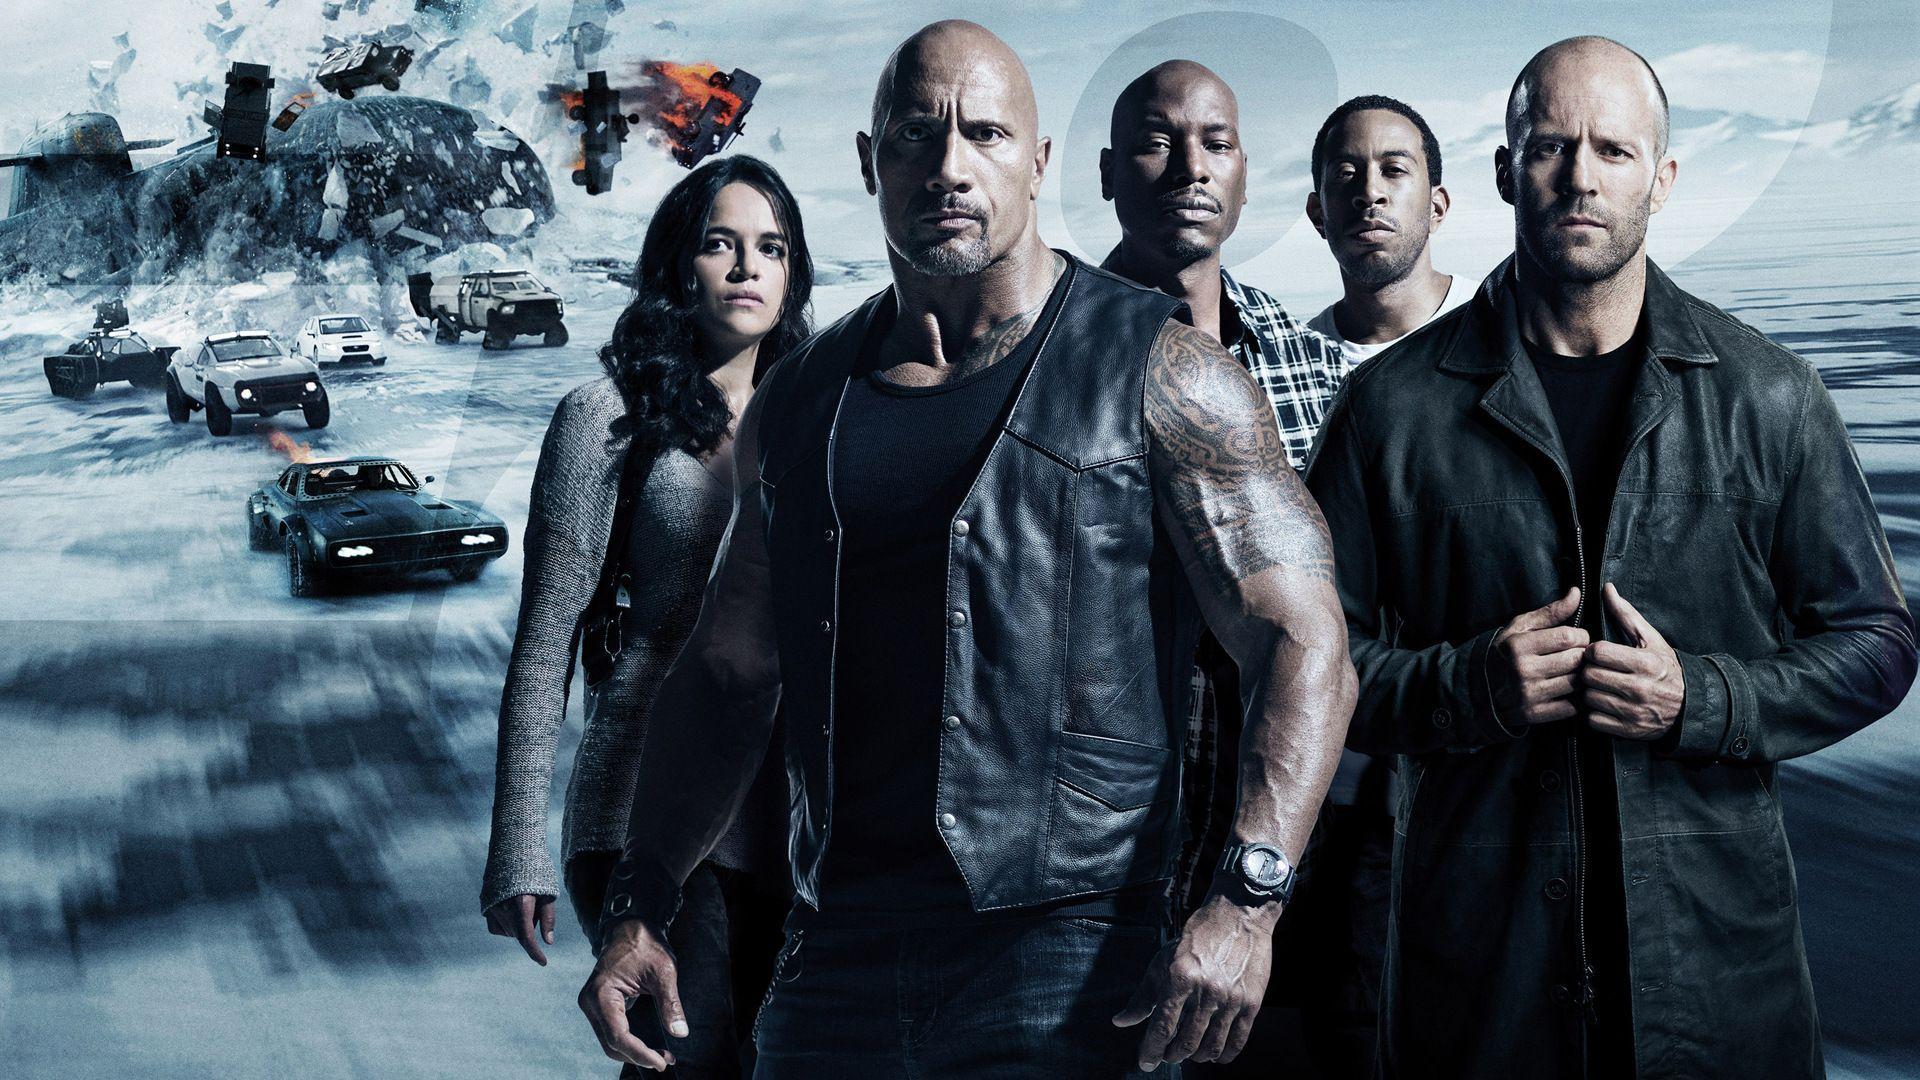 The Fate of the Furious 2017 (Movie) Wallpaper